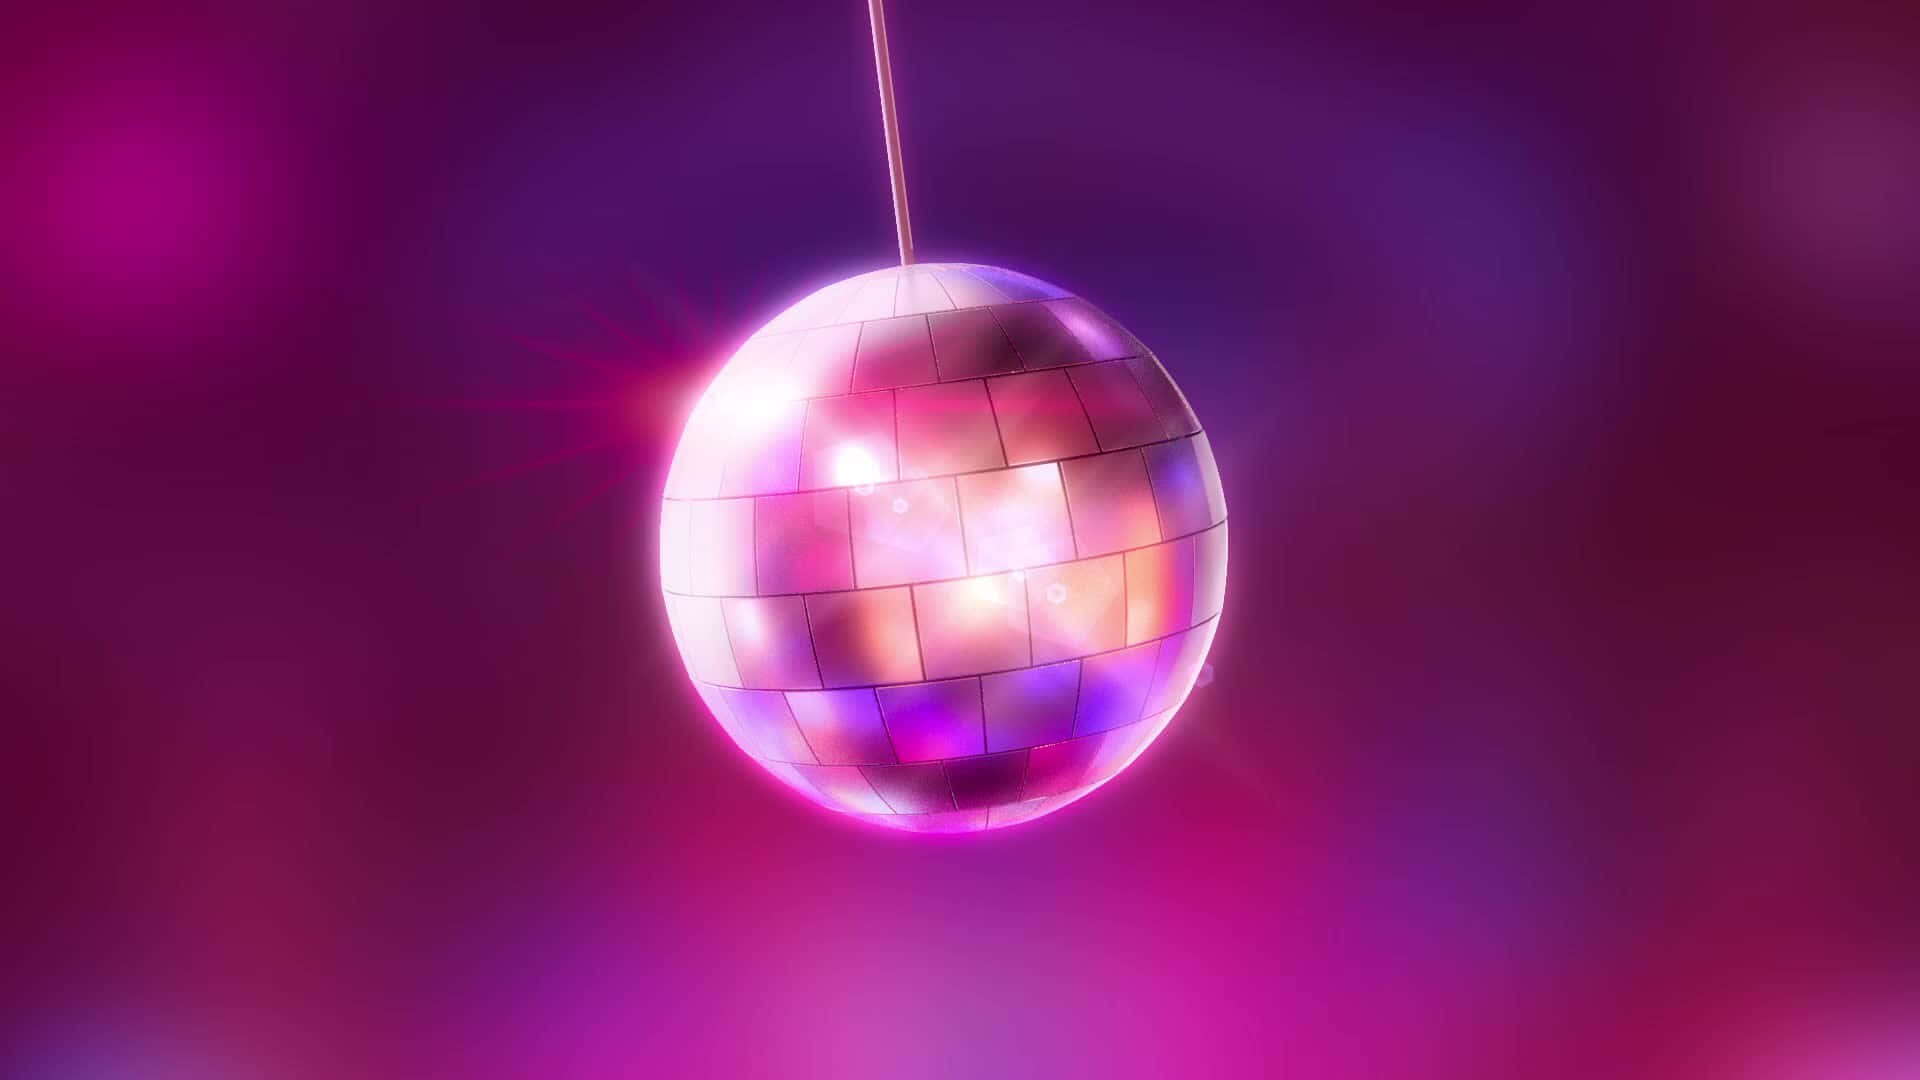 Download Disco Ball Live Wallpaper APK for Android